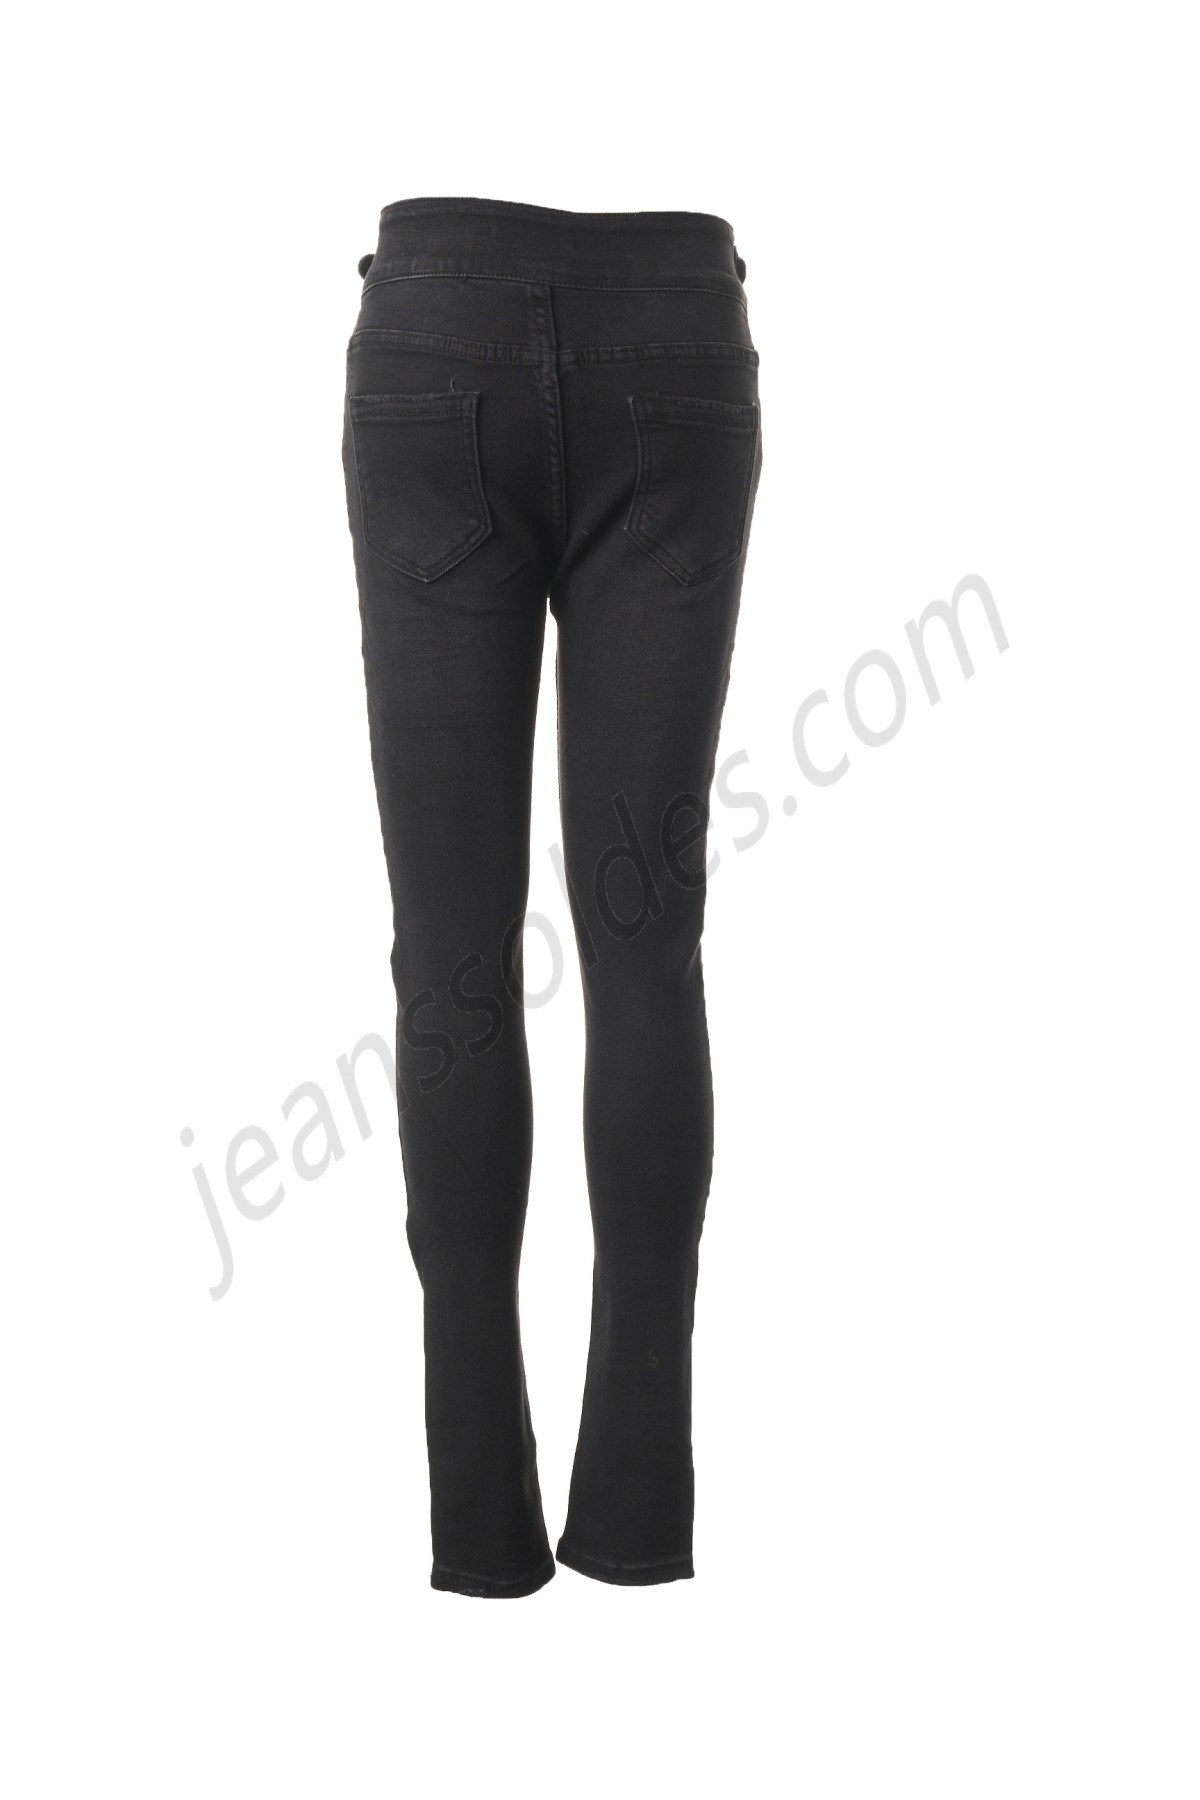 collection irl-Jeans coupe slim prix d’amis - -1